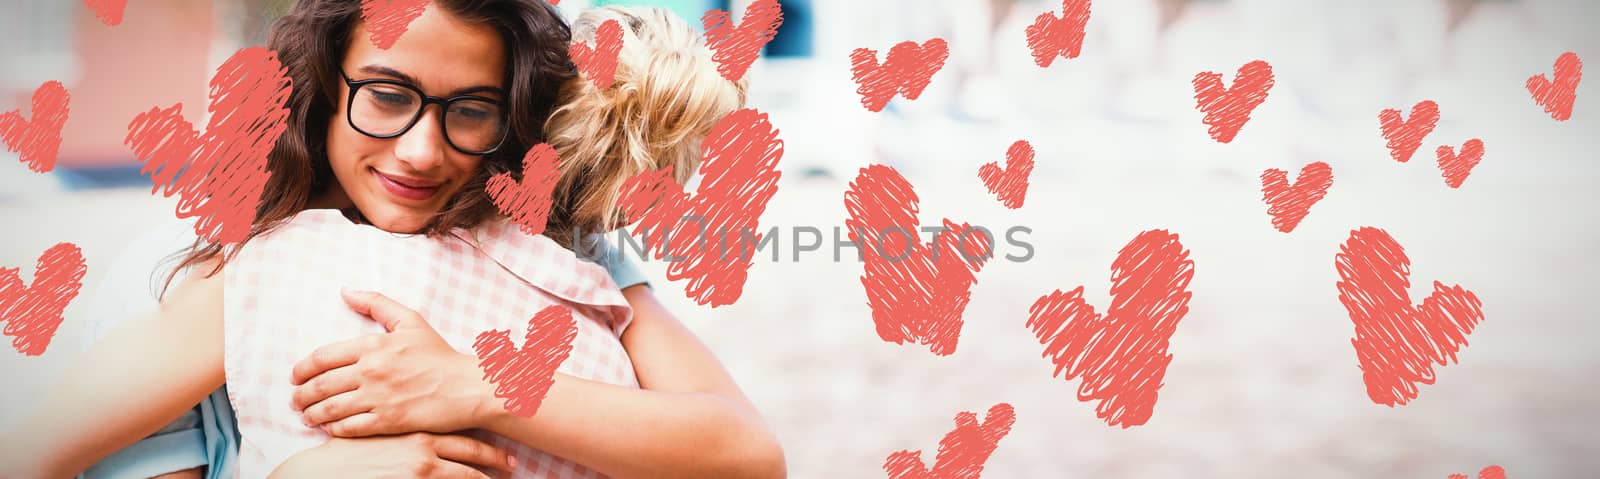 Composite image of red hearts by Wavebreakmedia